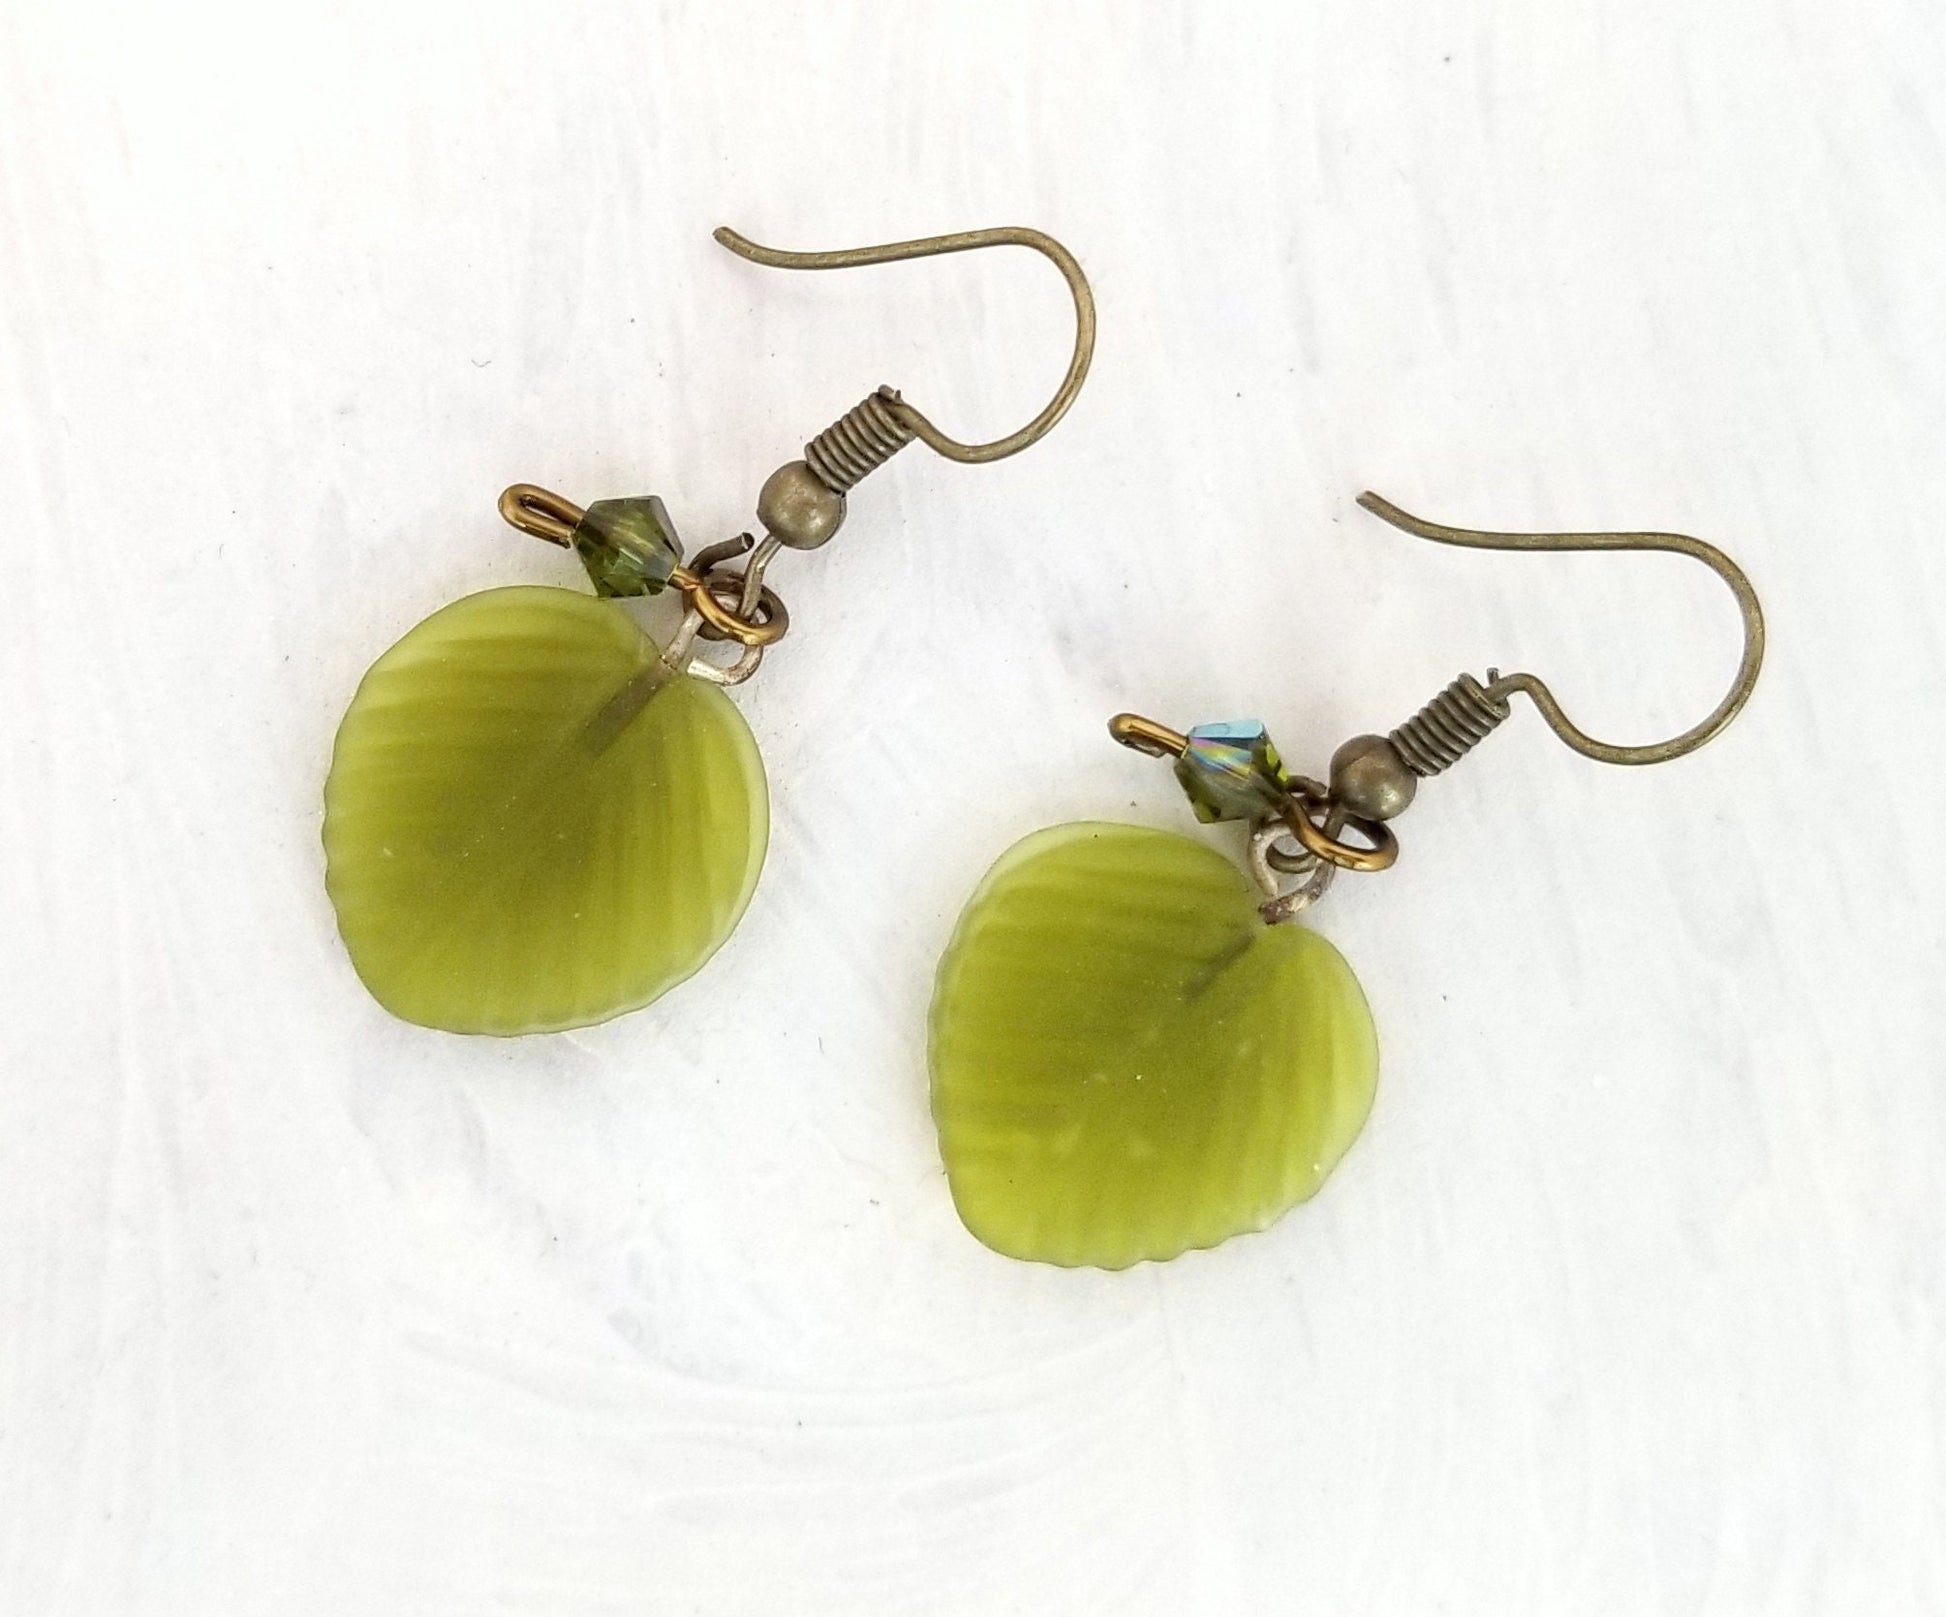 Medium Glass Leaf Earrings in Frosted Olive Green, Wedding, Bridesmaid, Art Nouveau, Renaissance, Forest, Choice of Closure Types